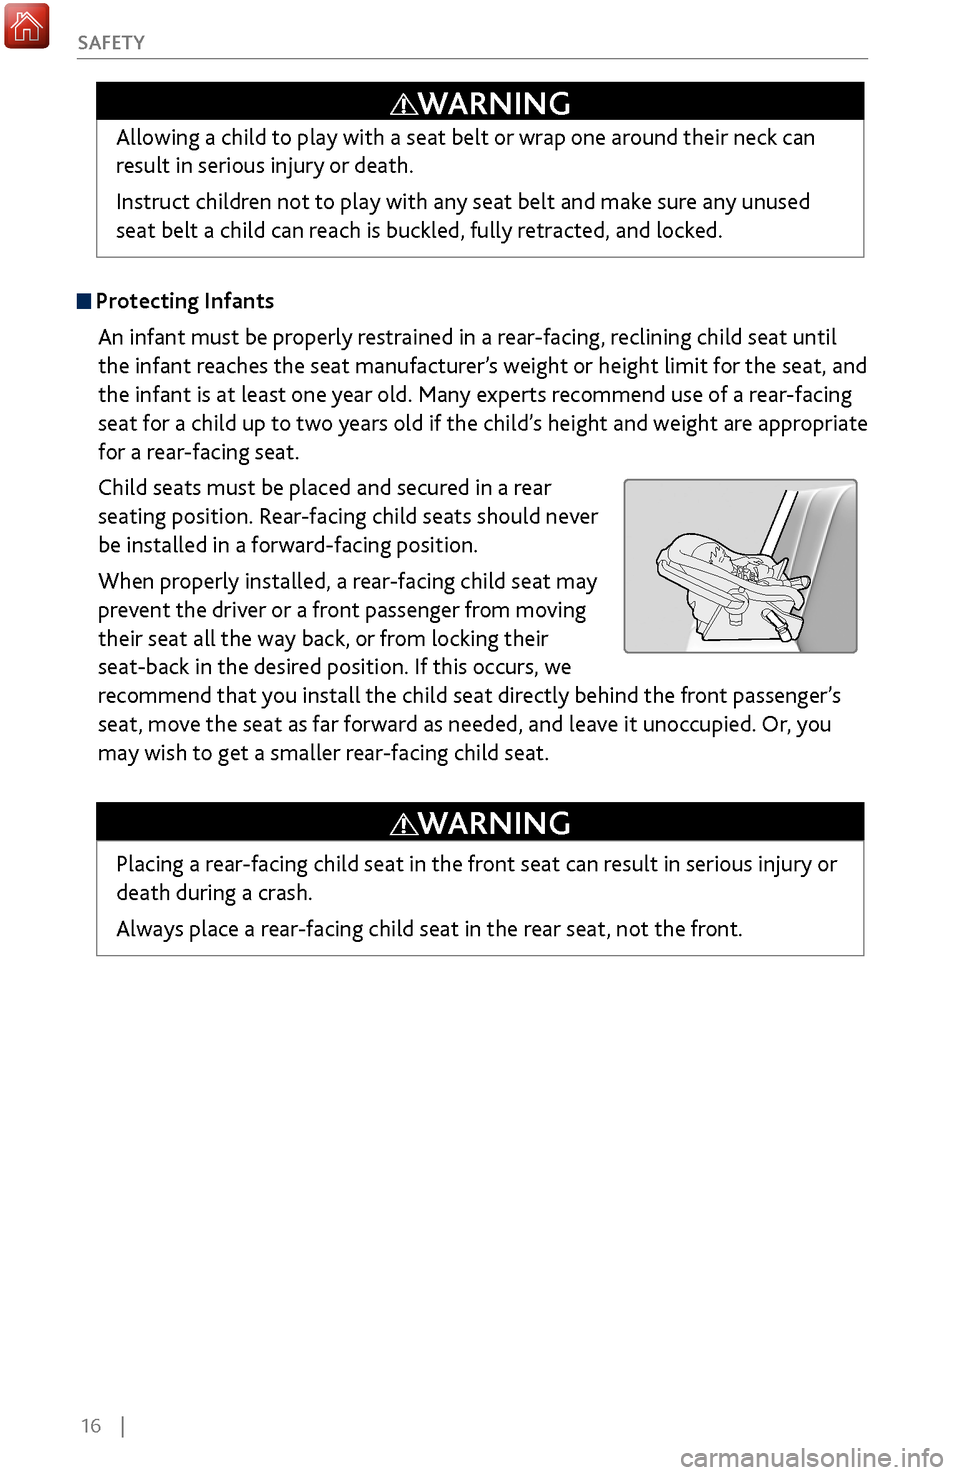 Acura MDX 2017 Owners Manual 16    |
S
AFETY
 Protecting Infants
An infant must be properly restrained in a rear-facing, reclining child seat until 
the infant reaches the seat manufacturer’s weight or height limit for the seat